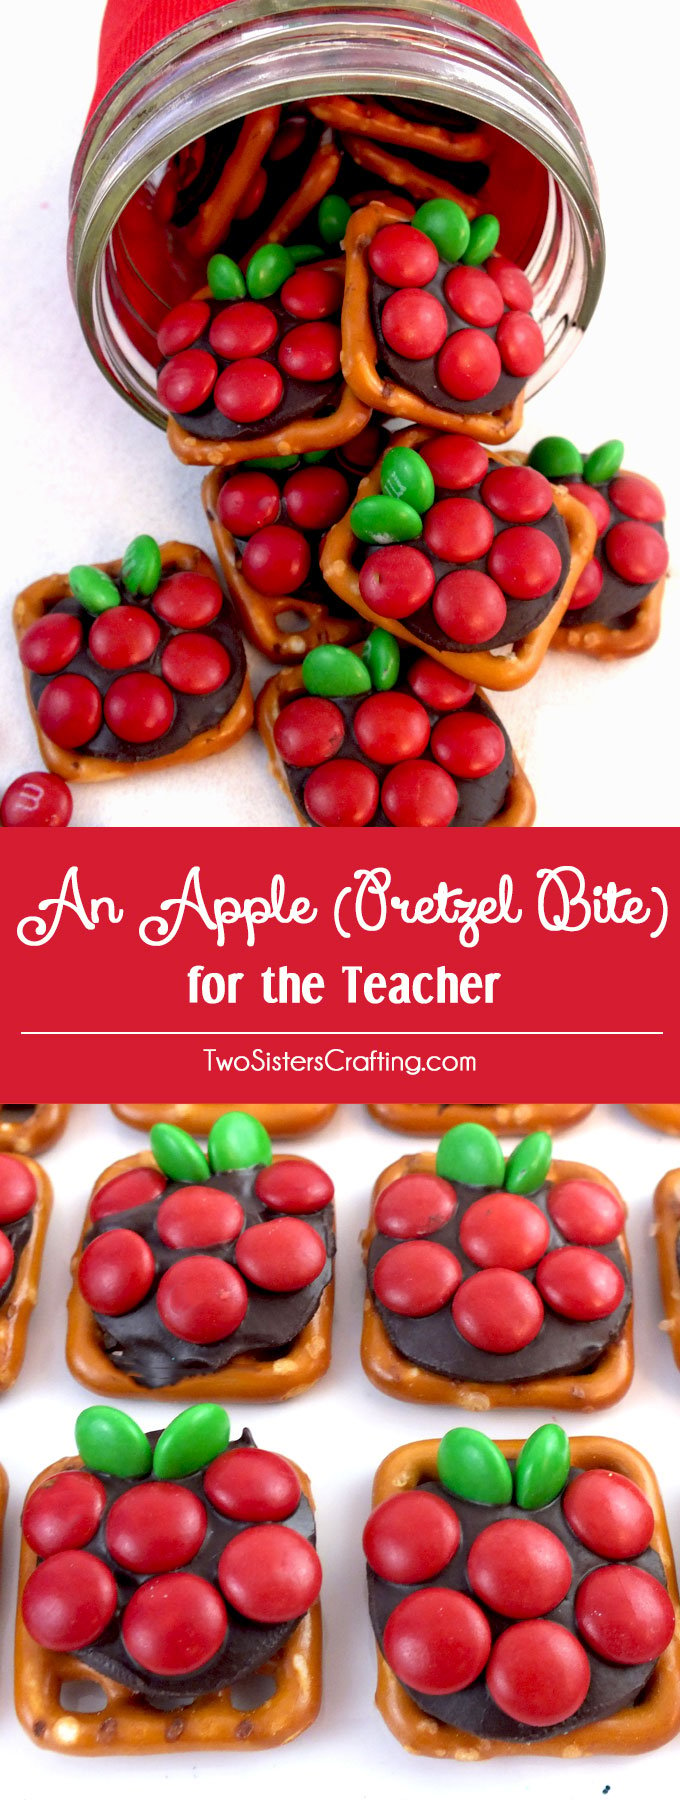 Over 25 End of the year teacher gifts and teacher appreciation gift ideas! www.kidfriendlythingstodo.com